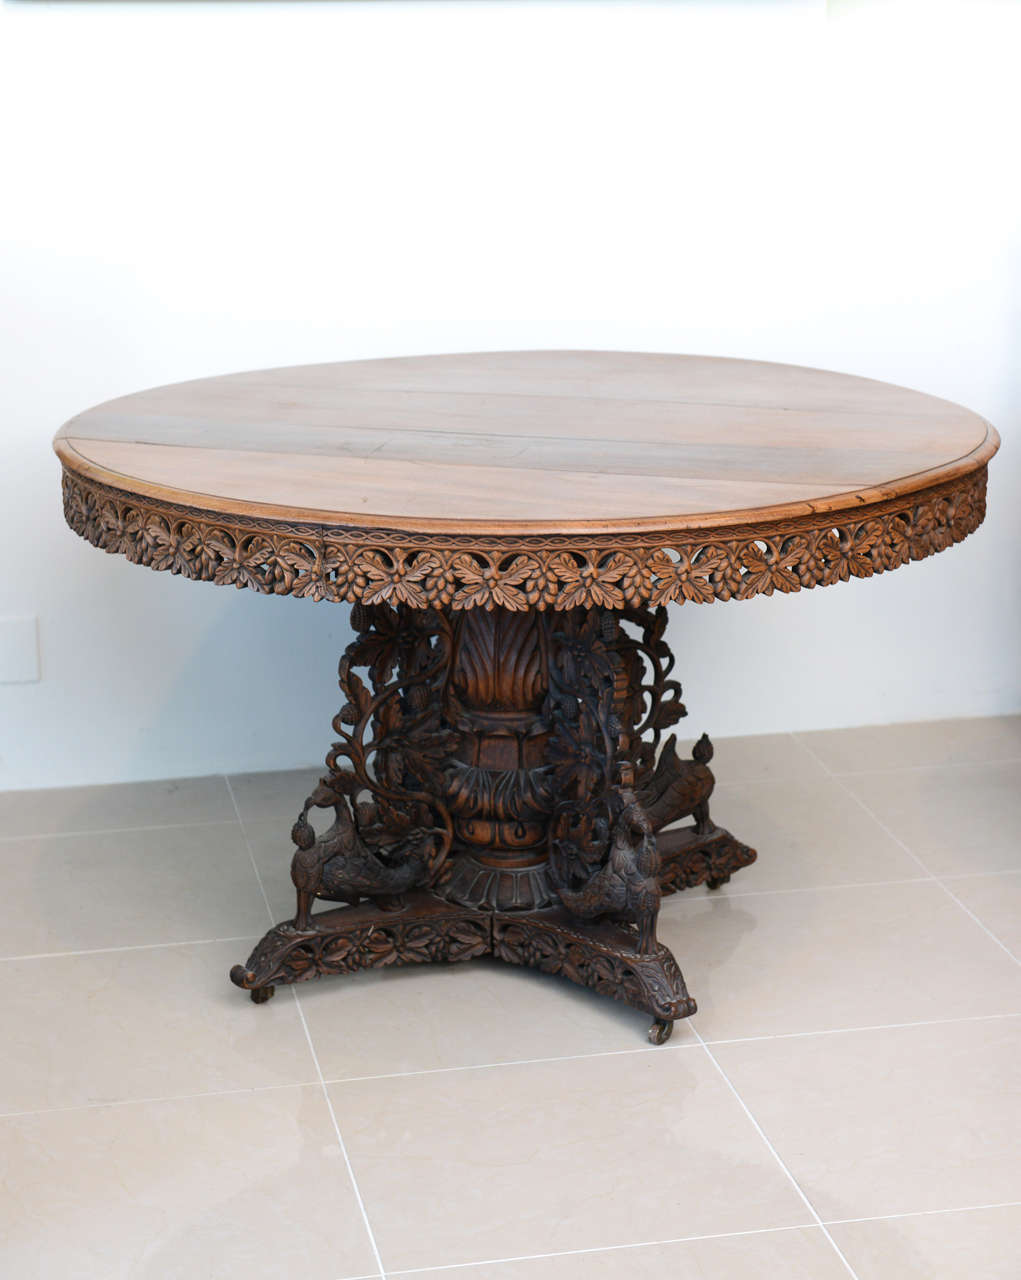 The round top with a carved frieze in leaf and berry motif above an elaborately carved base with peacocks and scrolling, the top with original tilt-top hardware.